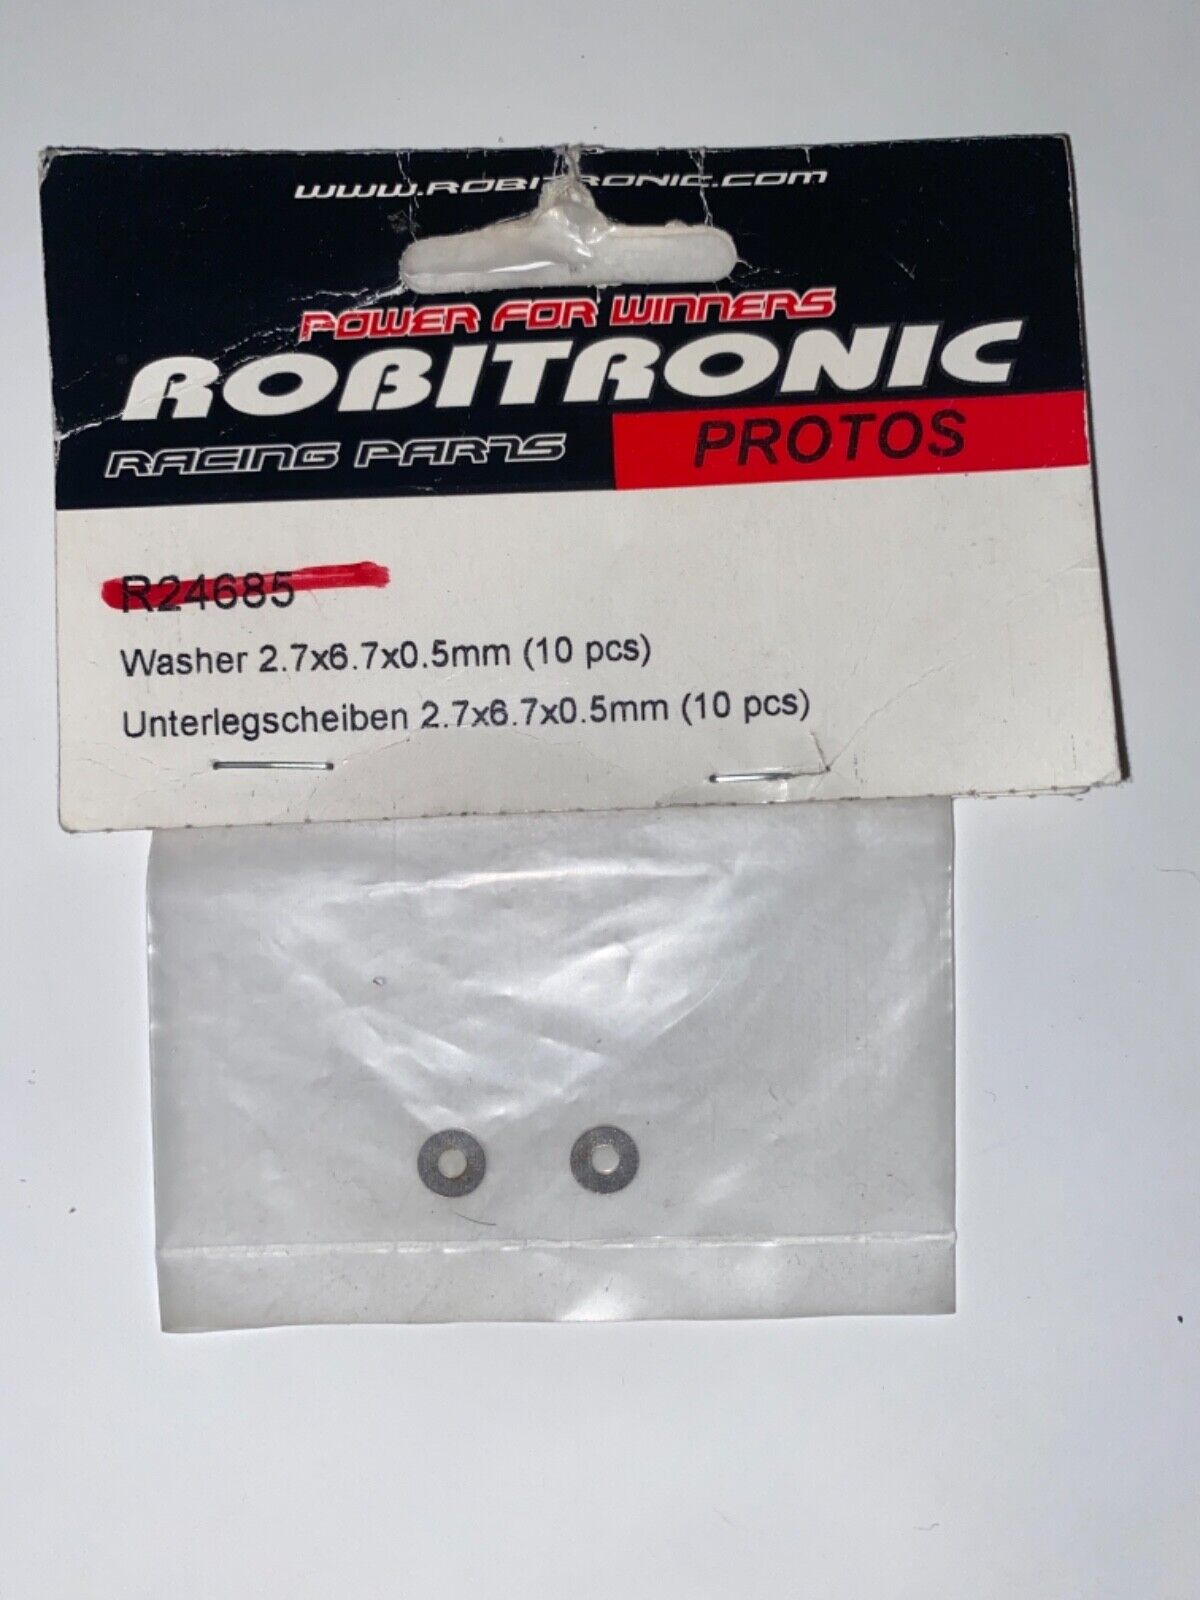 Robitronic Racing Parts Washer 2.7x6.7x0.5mm (10 Pcs.) #R24685